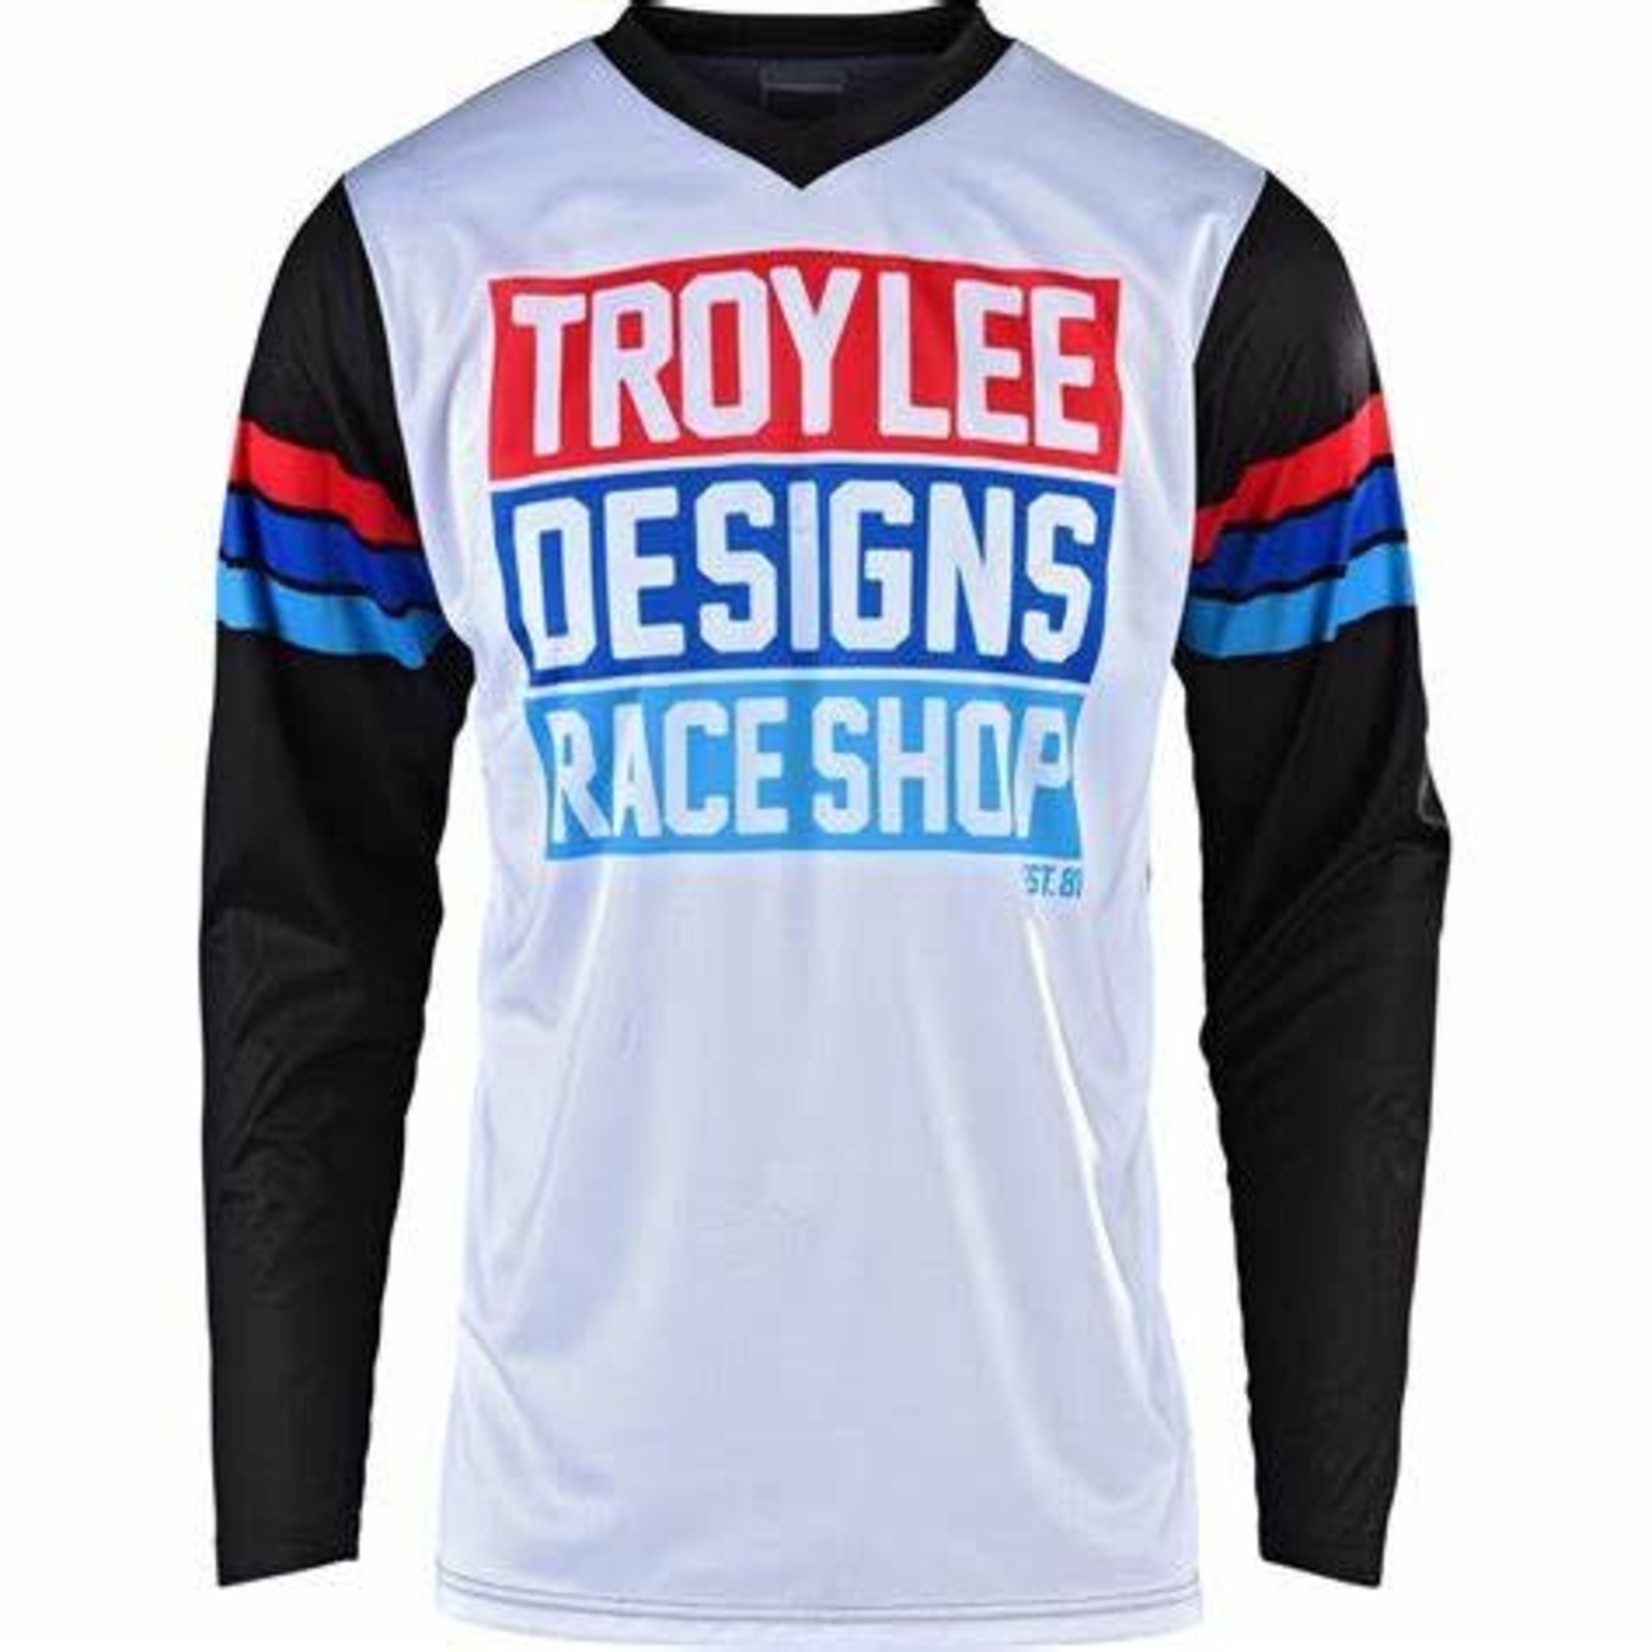 TROY LEE DESIGNS YOUTH GP Jersey, Carlsbad White/Black